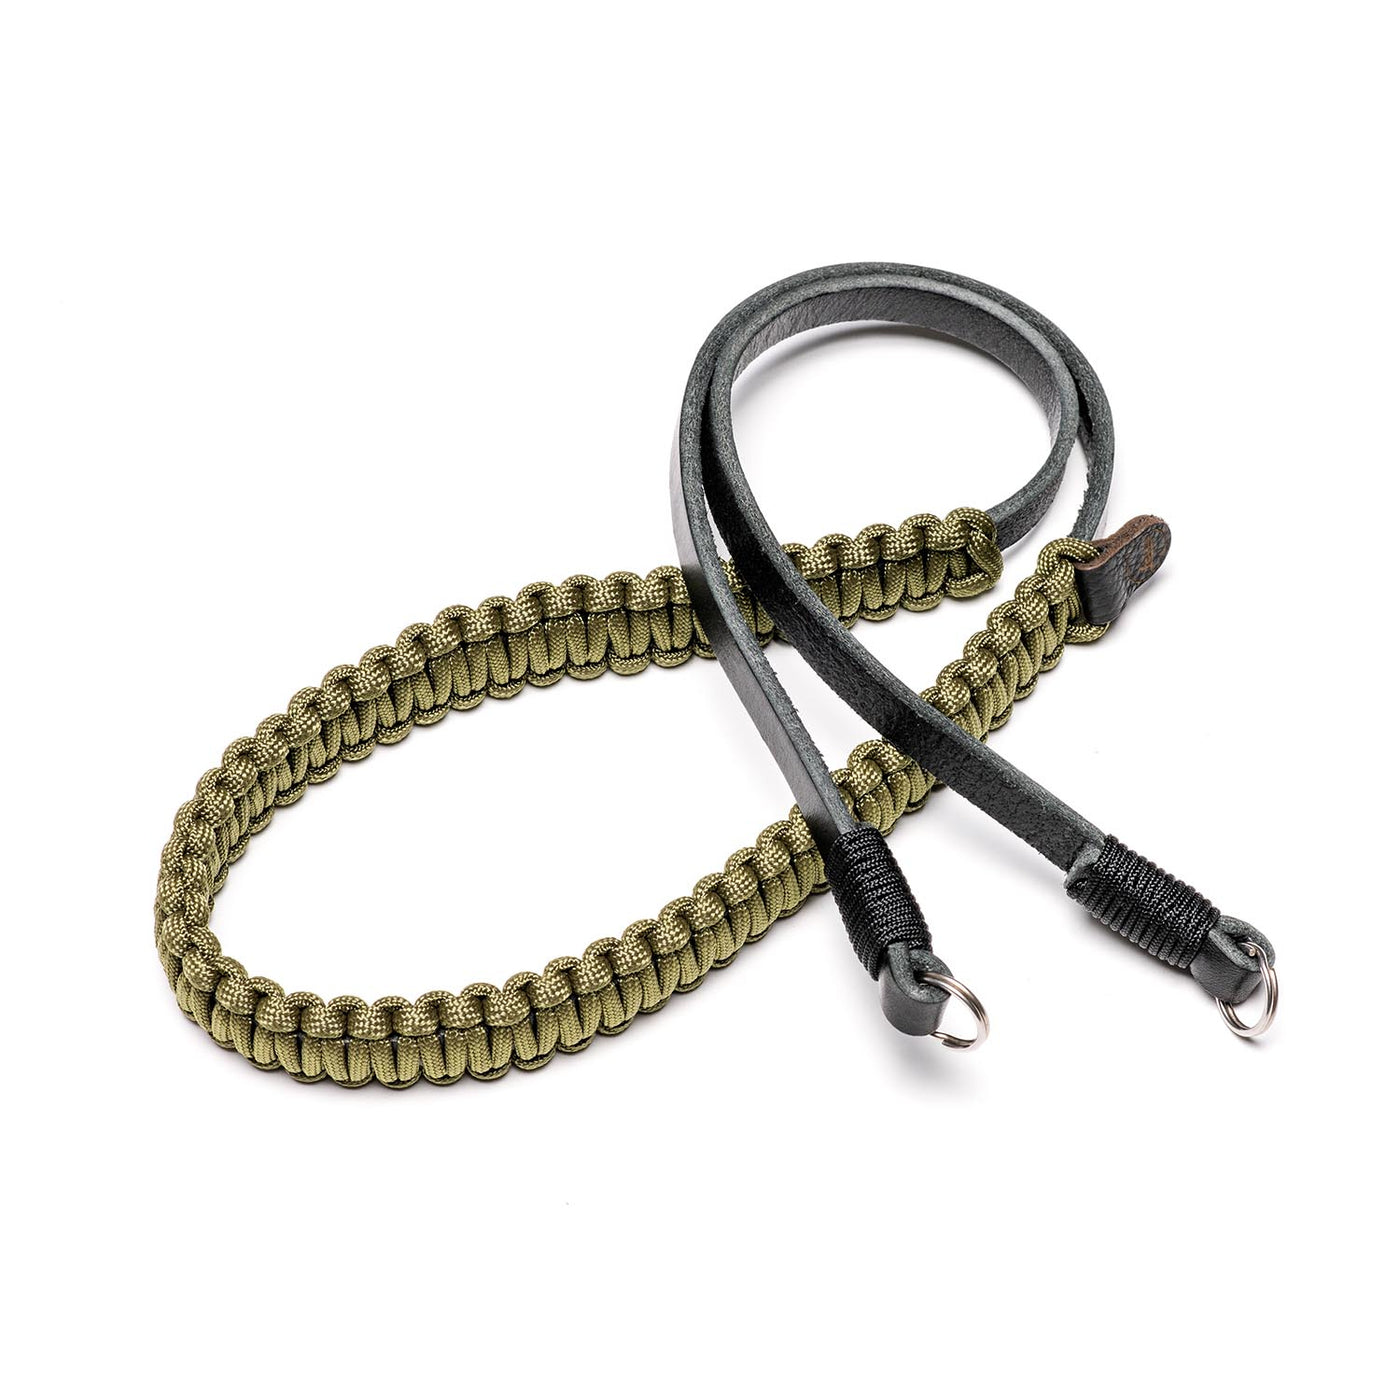 Leica Paracord Strap by Cooph, Black/Black, 100cm, Key-Ring Style - Leica  Store Miami